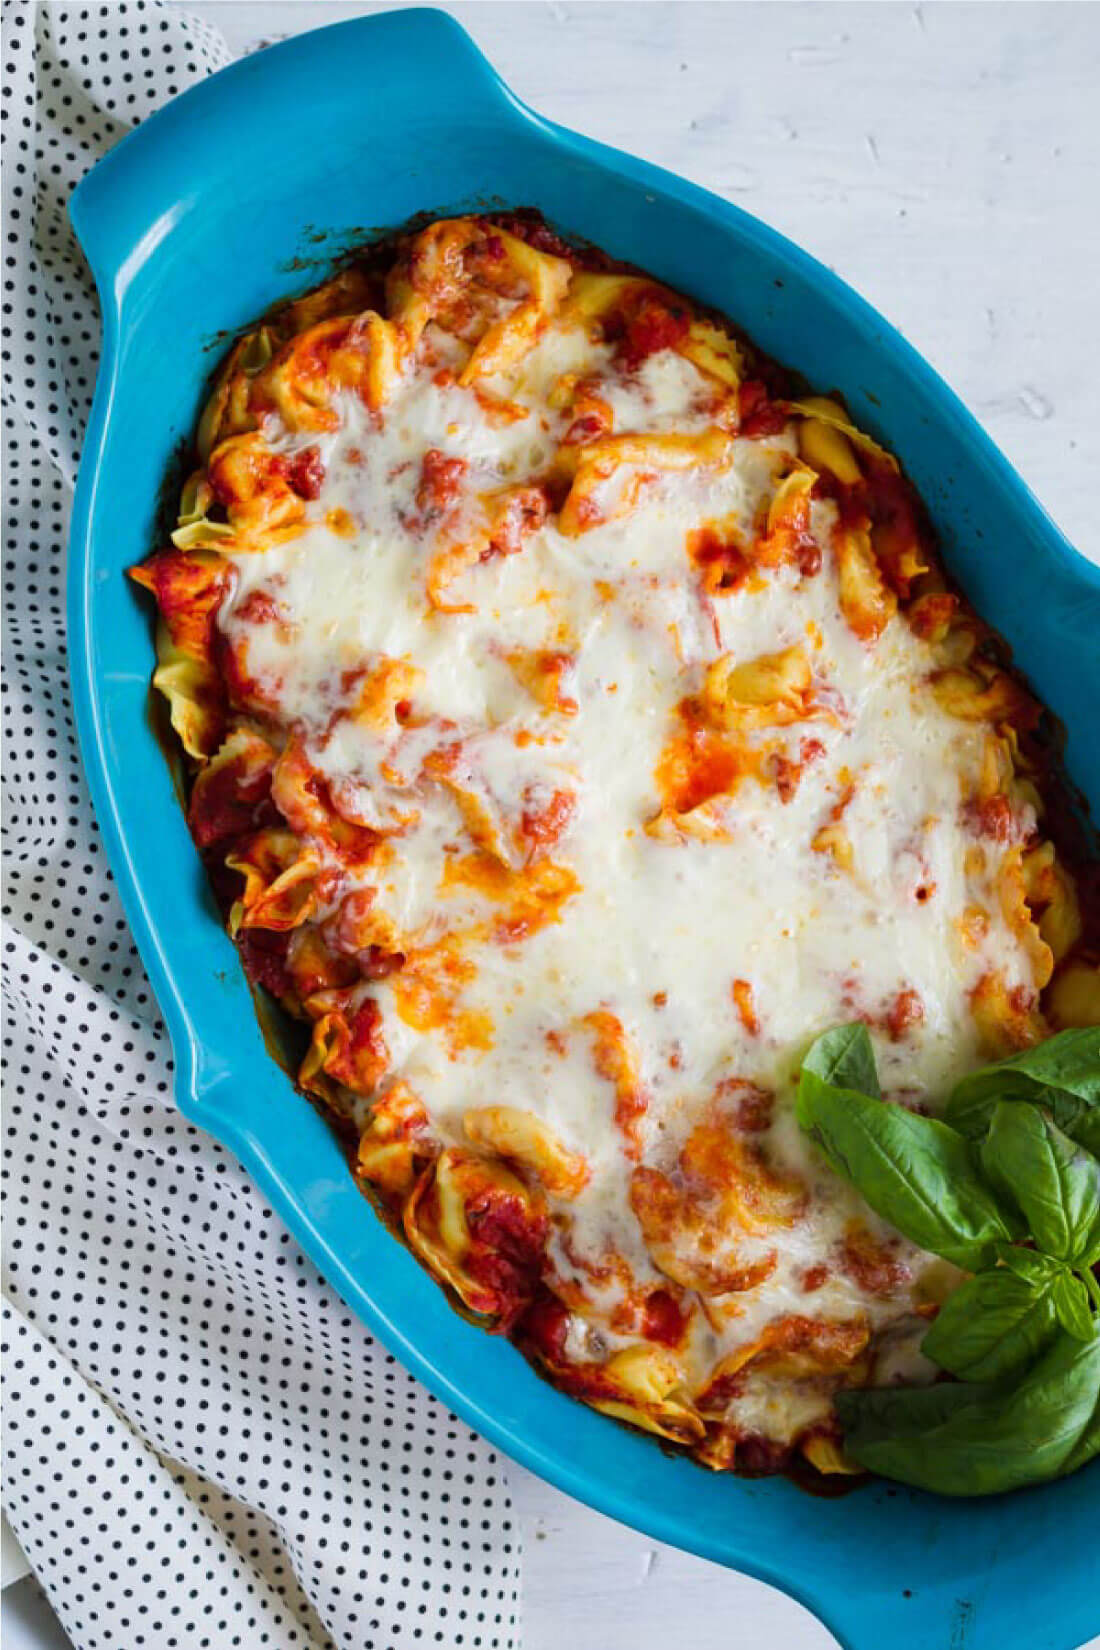 Super simple but tasty Baked Tortellini - if your family likes pasta, they will love this ooey gooey main dish! from www.thirtyhandmadedays.com